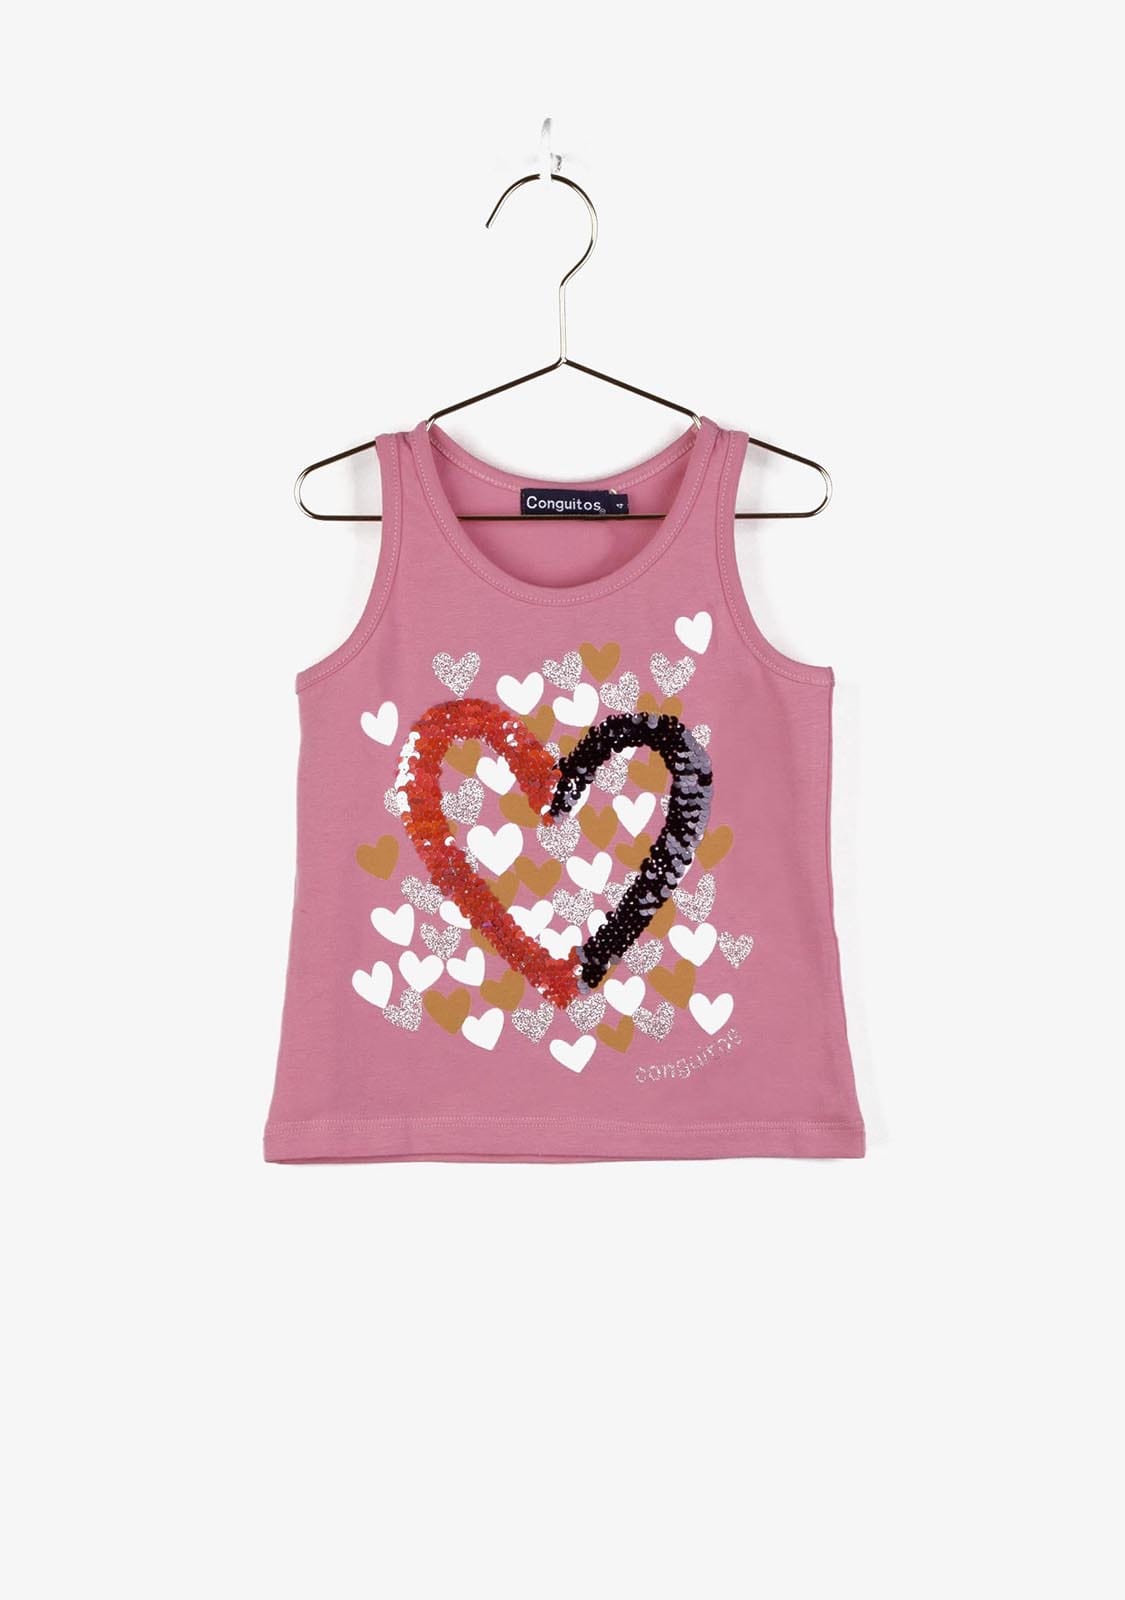 CONGUITOS TEXTIL Clothing Girl's "Hearts" Pink T-Shirt